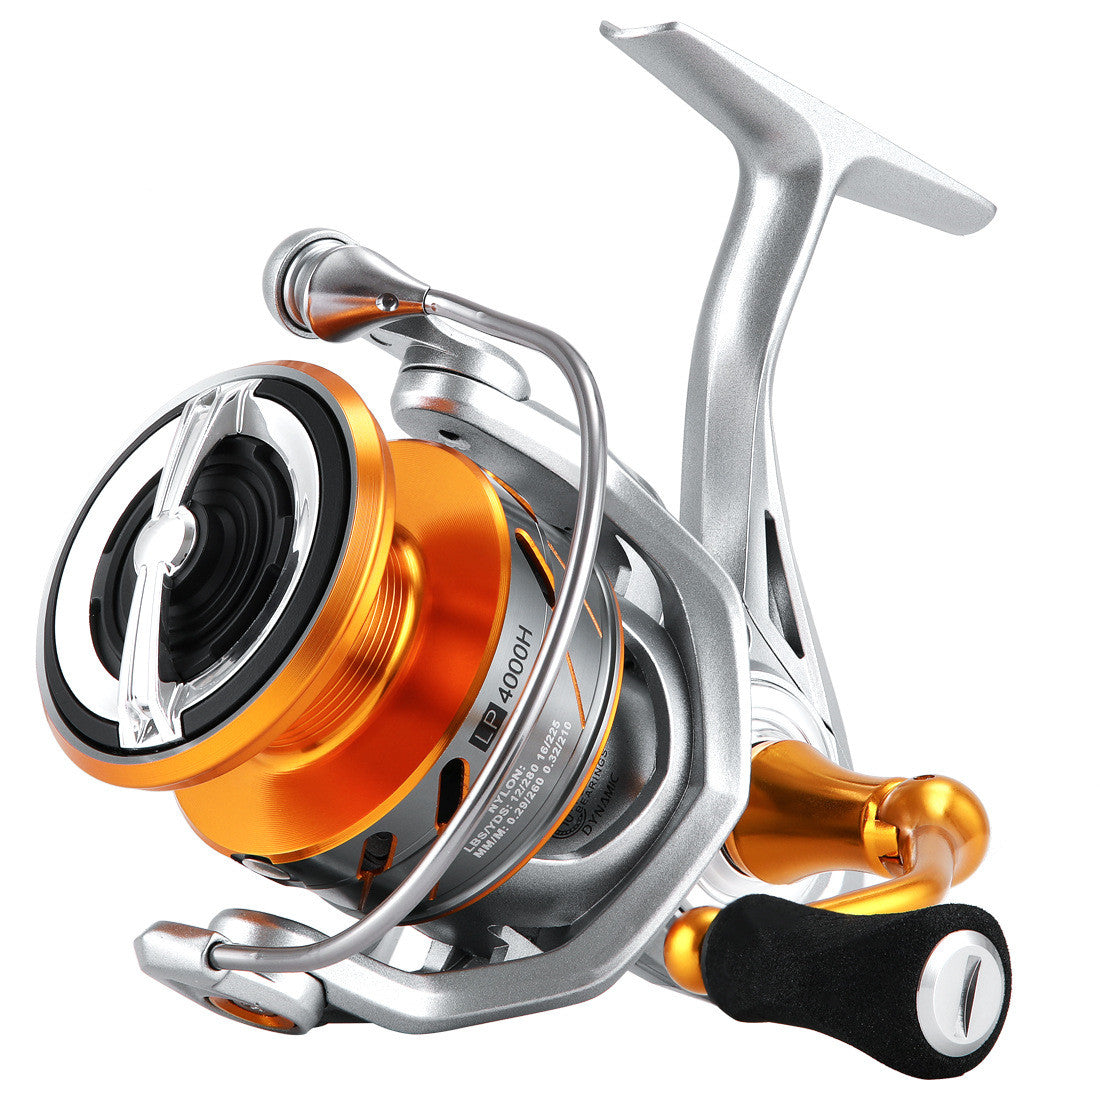 All Metal Long Cast Speed Ratio Fishing Reel - Enhance Your Fishing Experience!